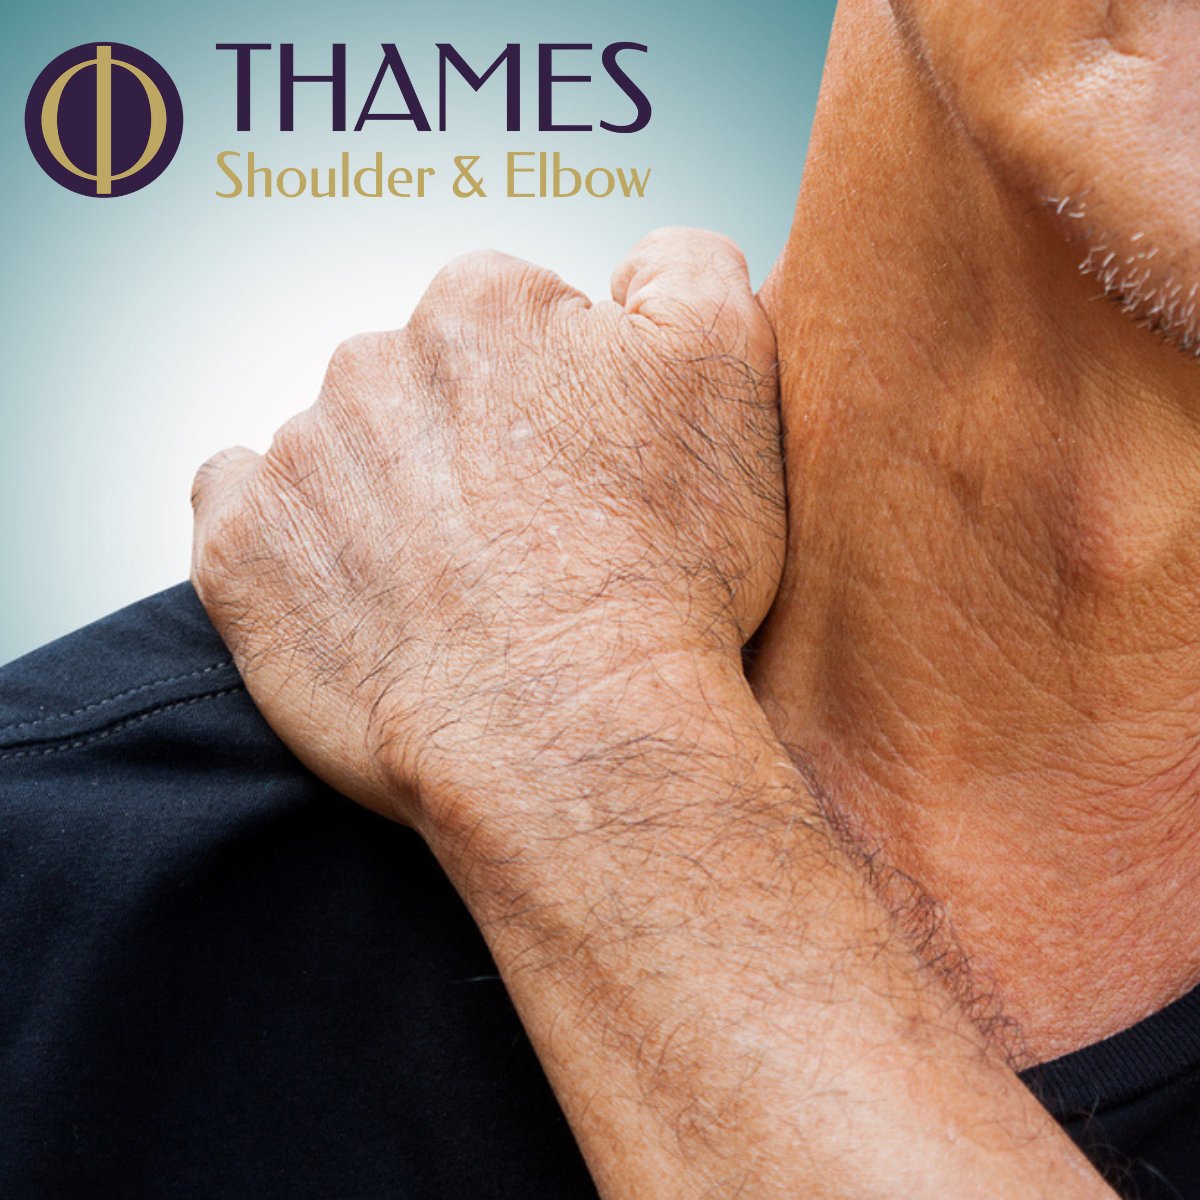 Pinched, trapped or damaged nerves can cause pain, numbness and weakness in your arm.
Good news - most nerve conditions affecting the arm are quite easy to spot and treat.
Read more here: thamesshoulderandelbow.co.uk/diagnosis/nerv…
Appointments: thamesshoulderandelbow.co.uk/contact/
 T | 020 376 15987